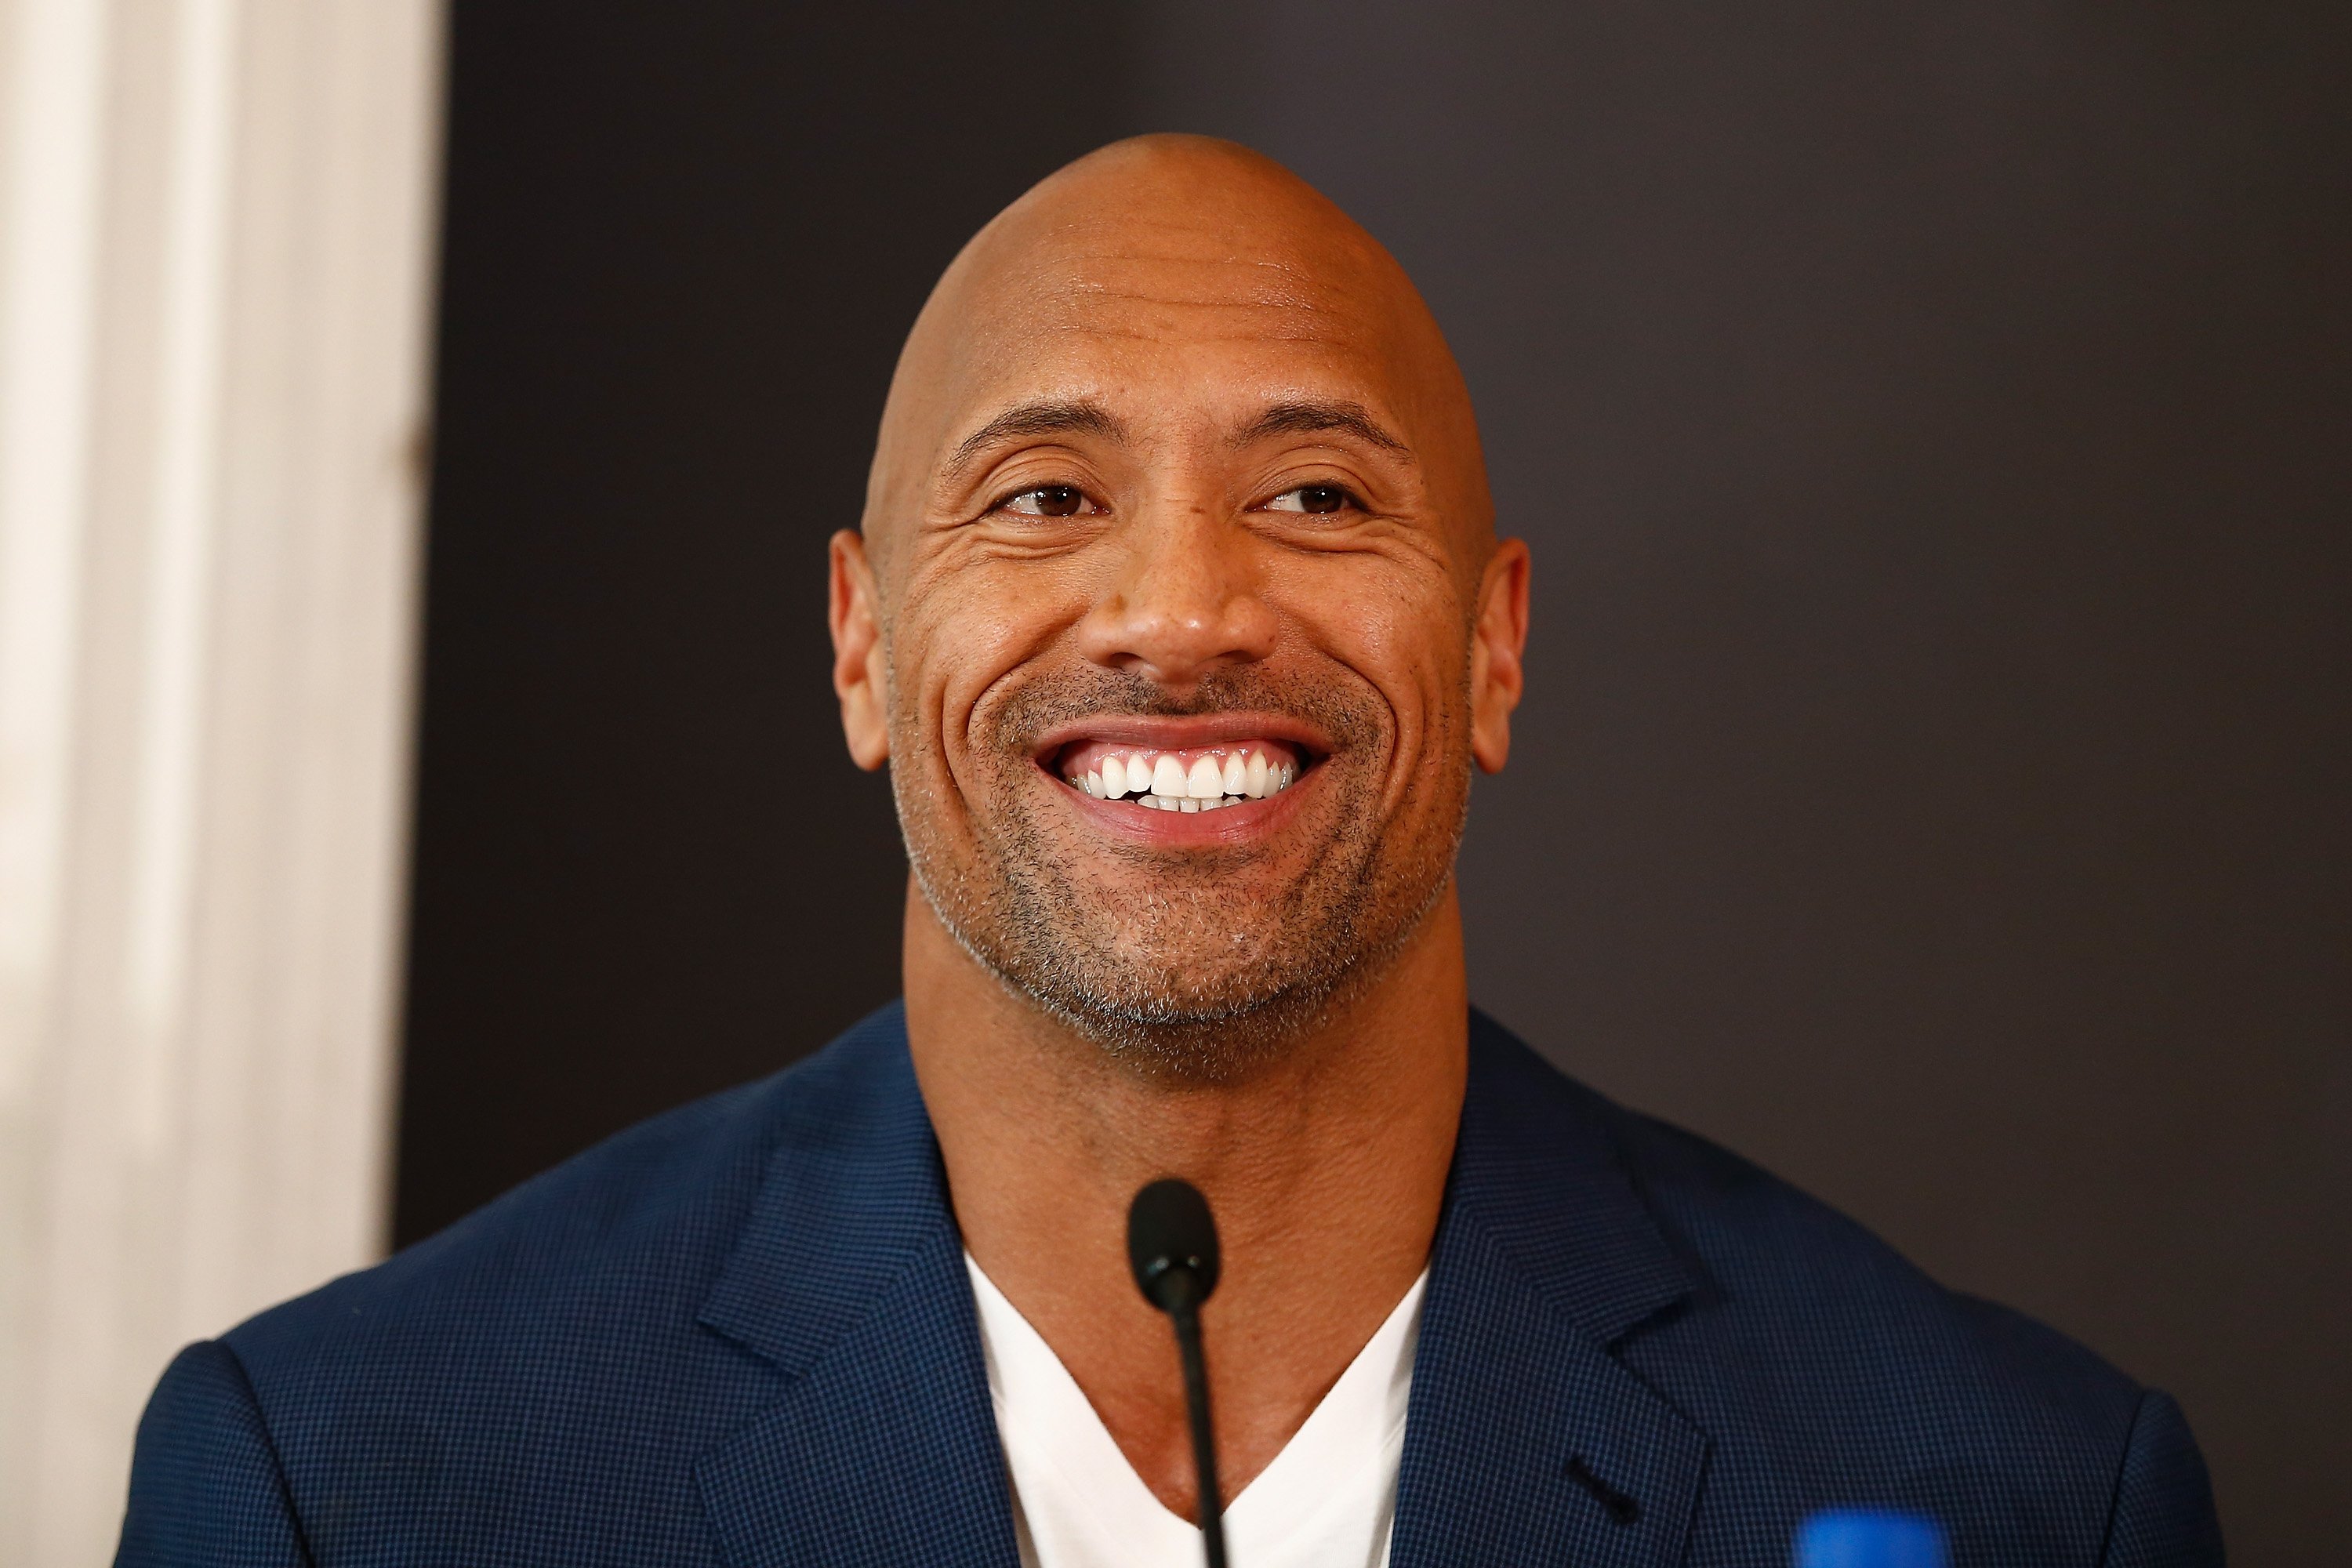 Dwayne Johnson at a press conference for "Hercules" in August 2014. | Photo: Getty Images